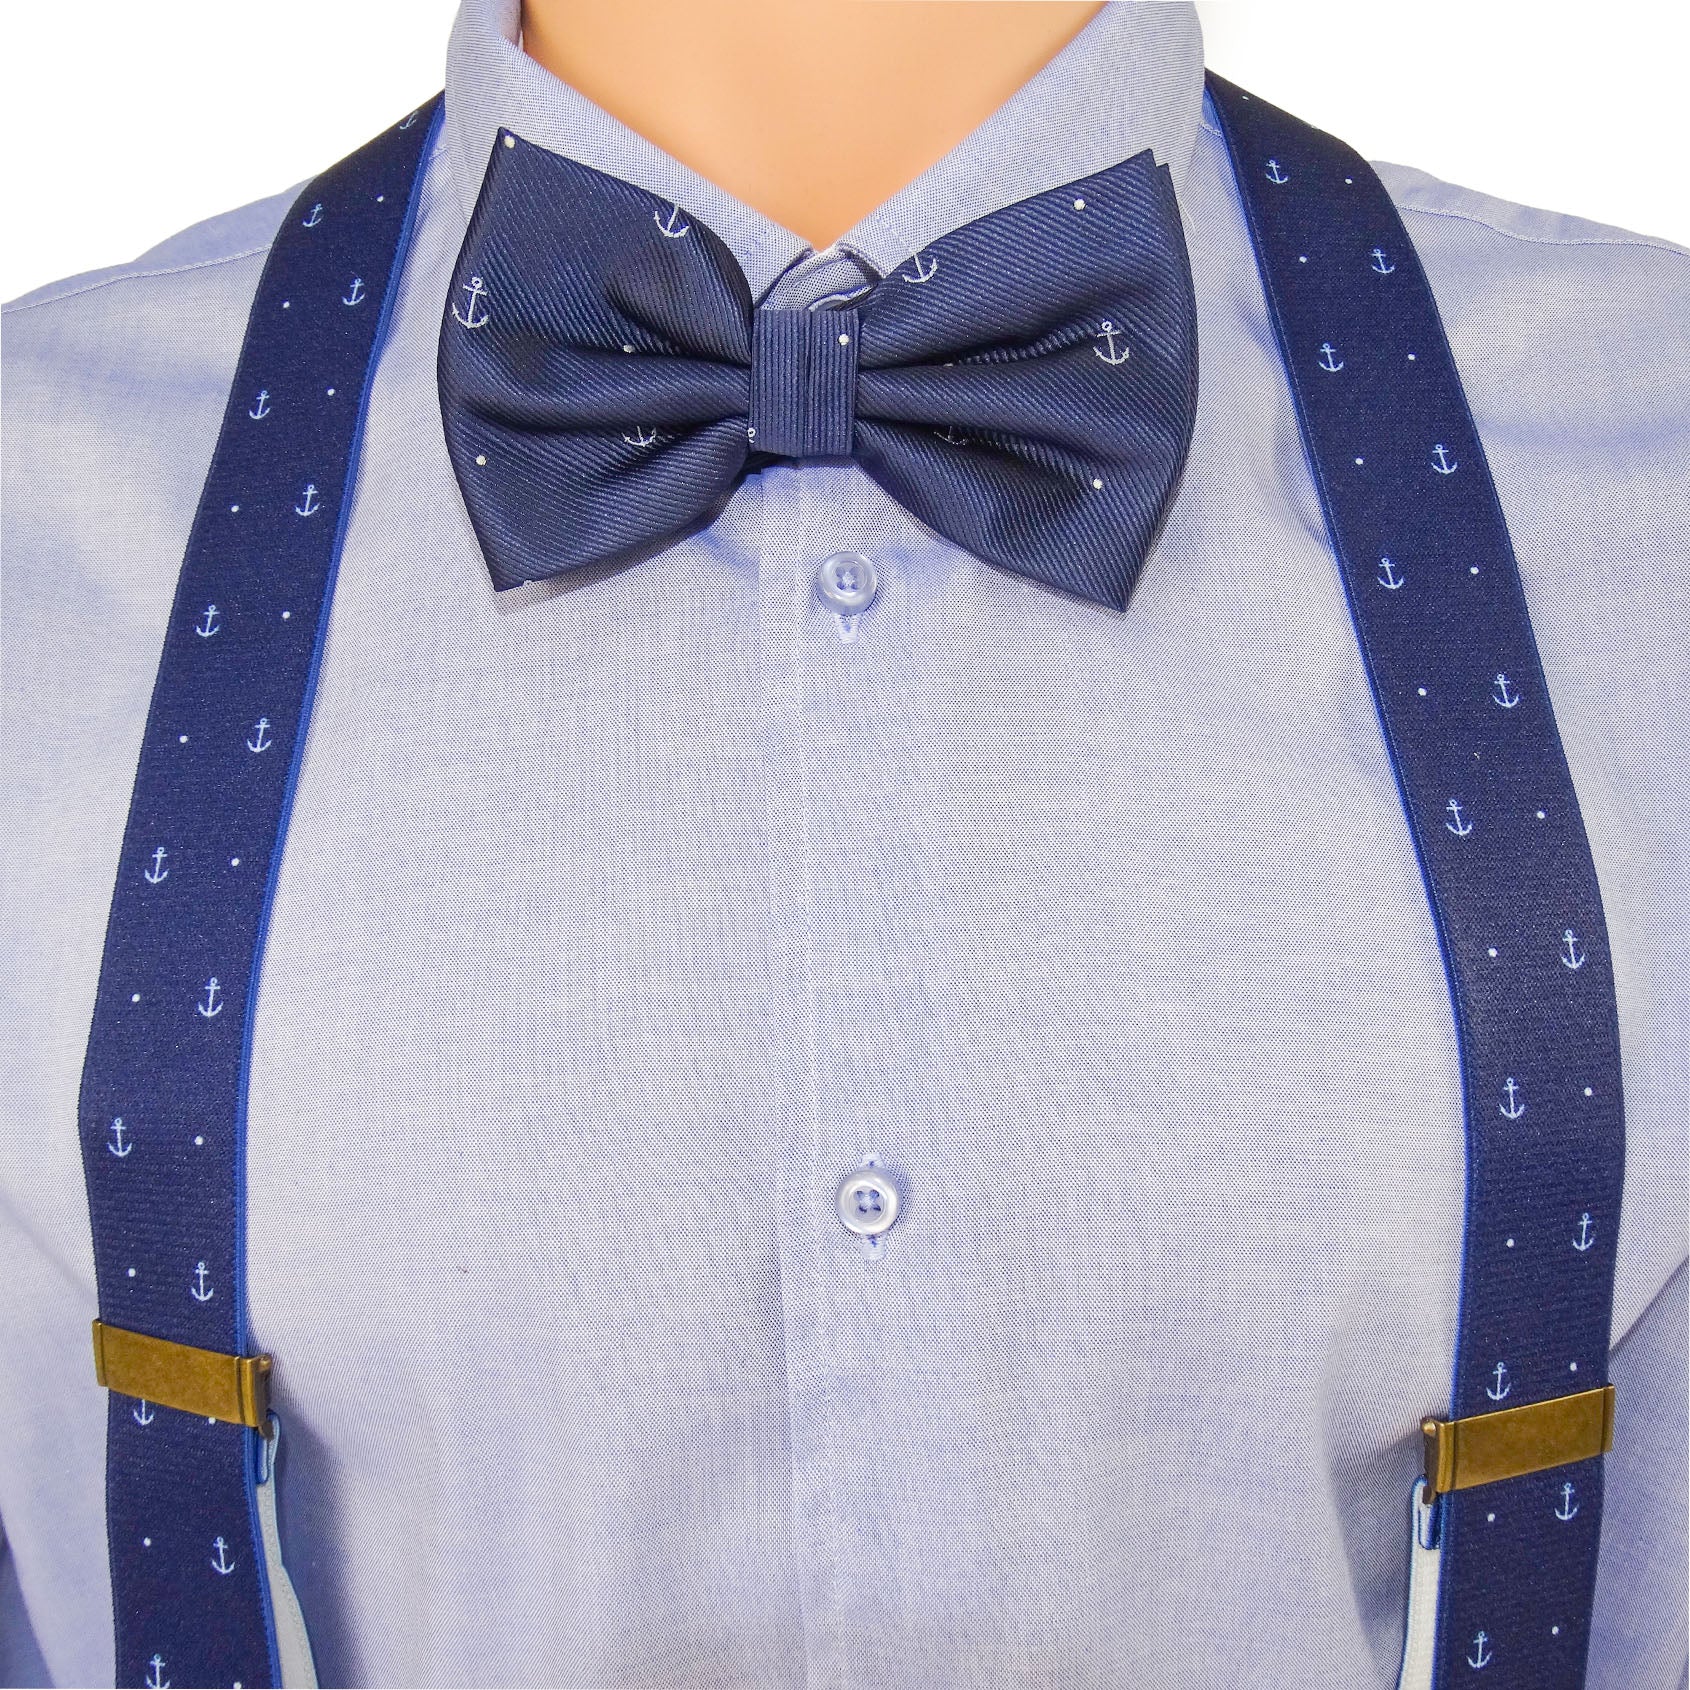 Anchor suspenders with bow gift set